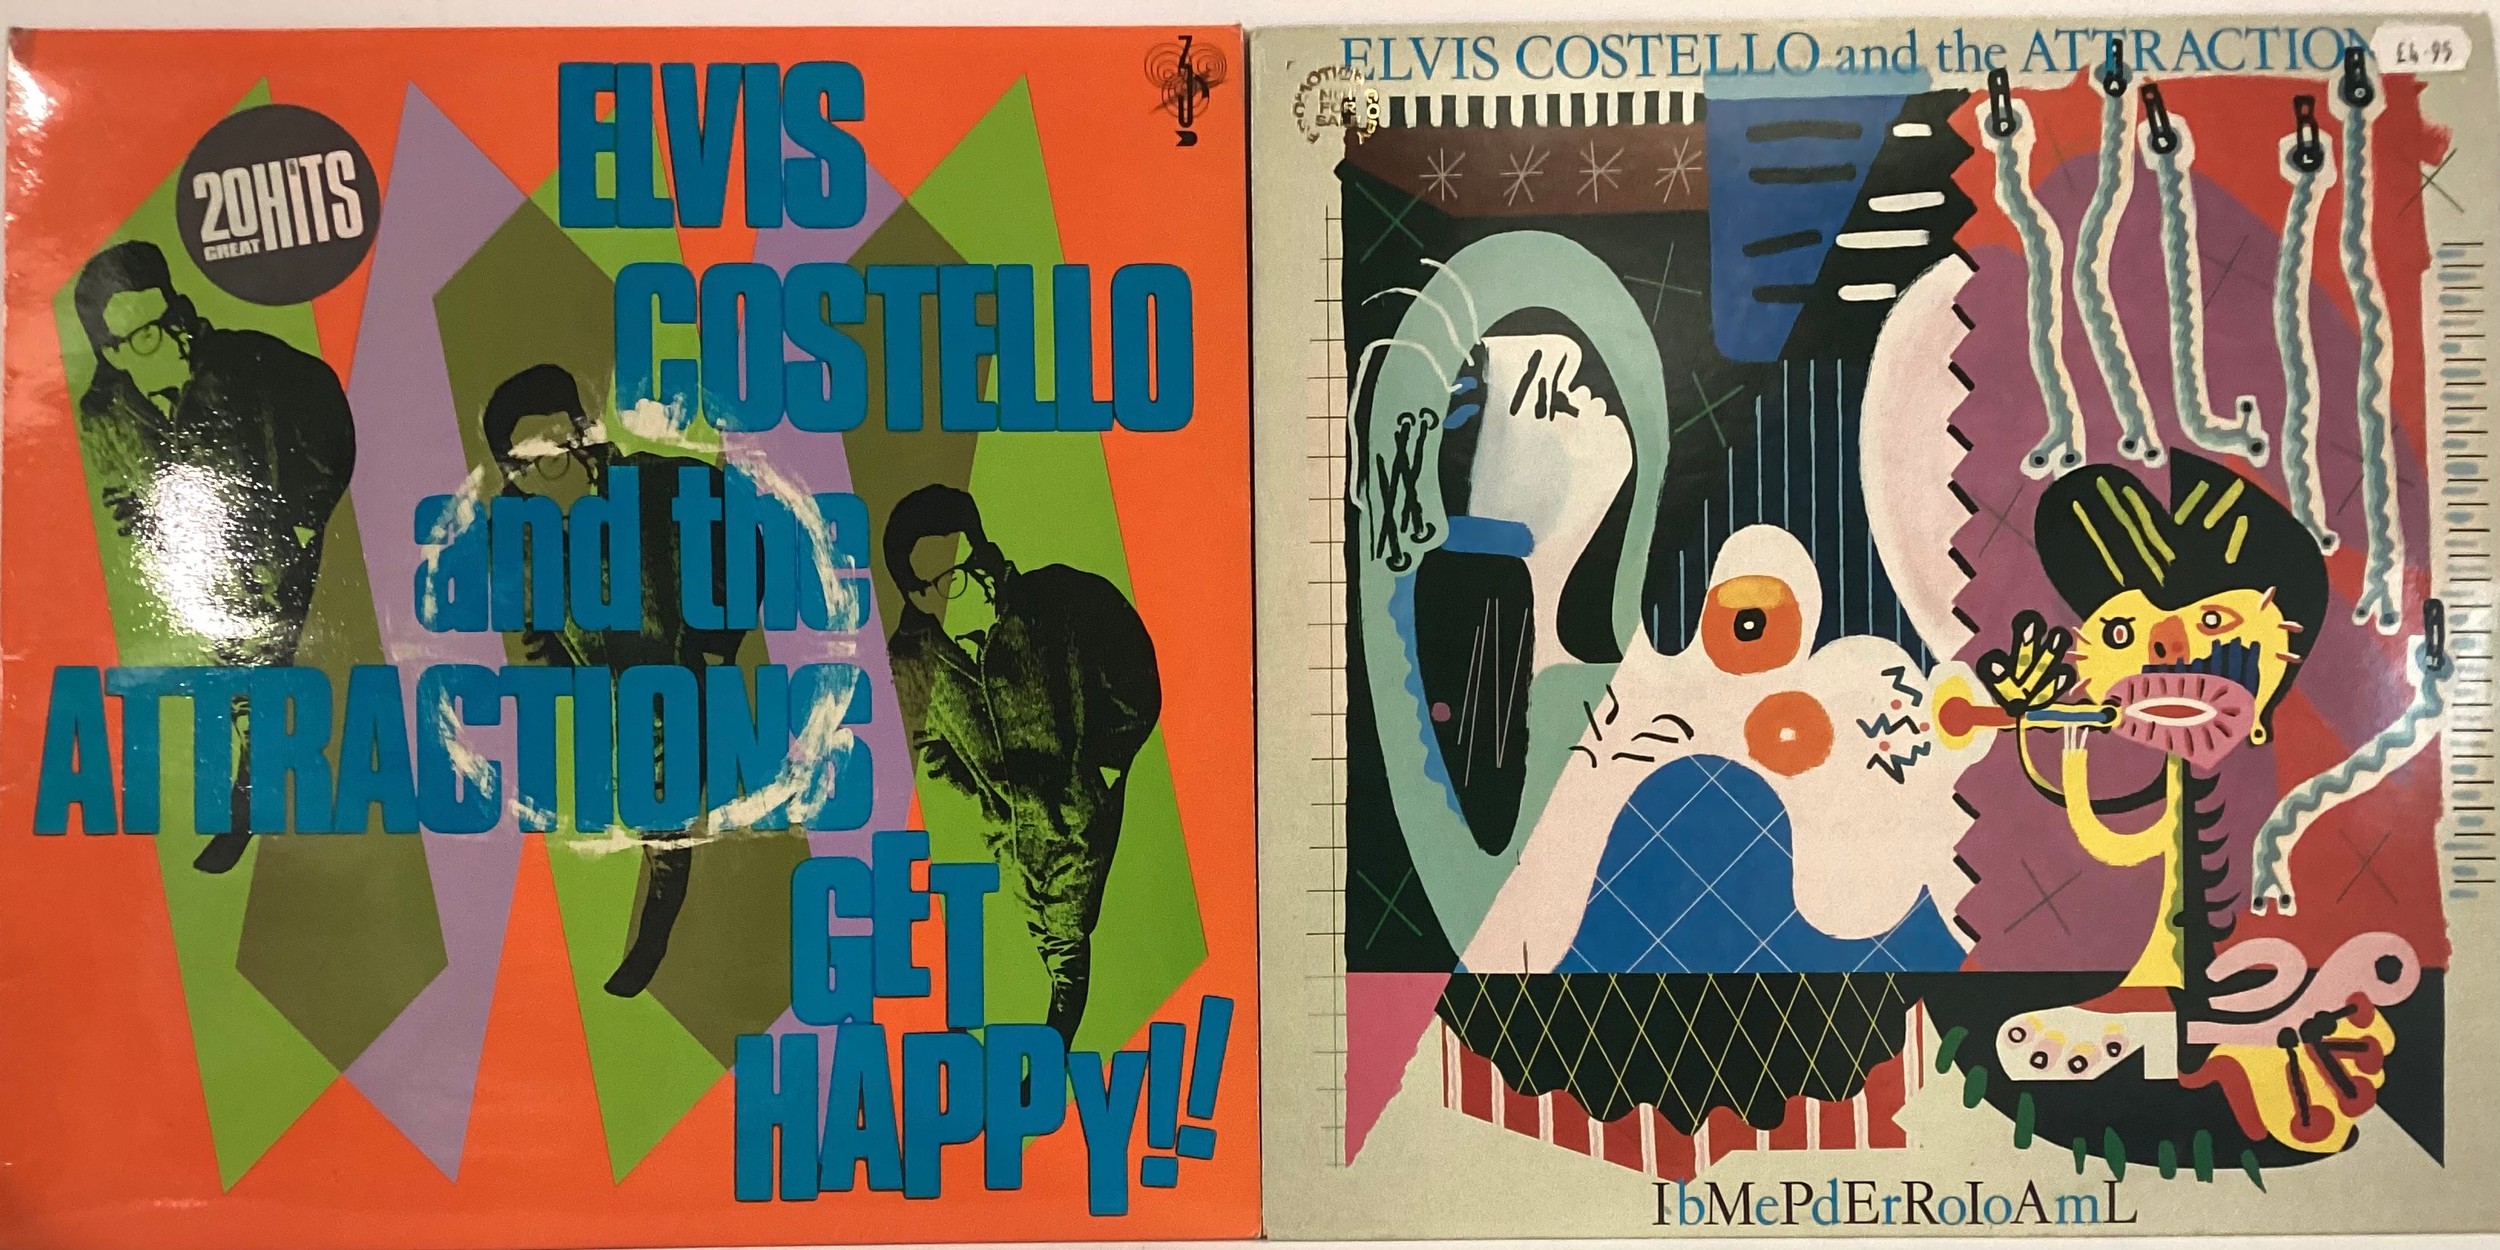 ELVIS COSTELLO VINYL LP RECORDS X 2. First title is ‘Get Happy’ complete with poster and ‘Imperial